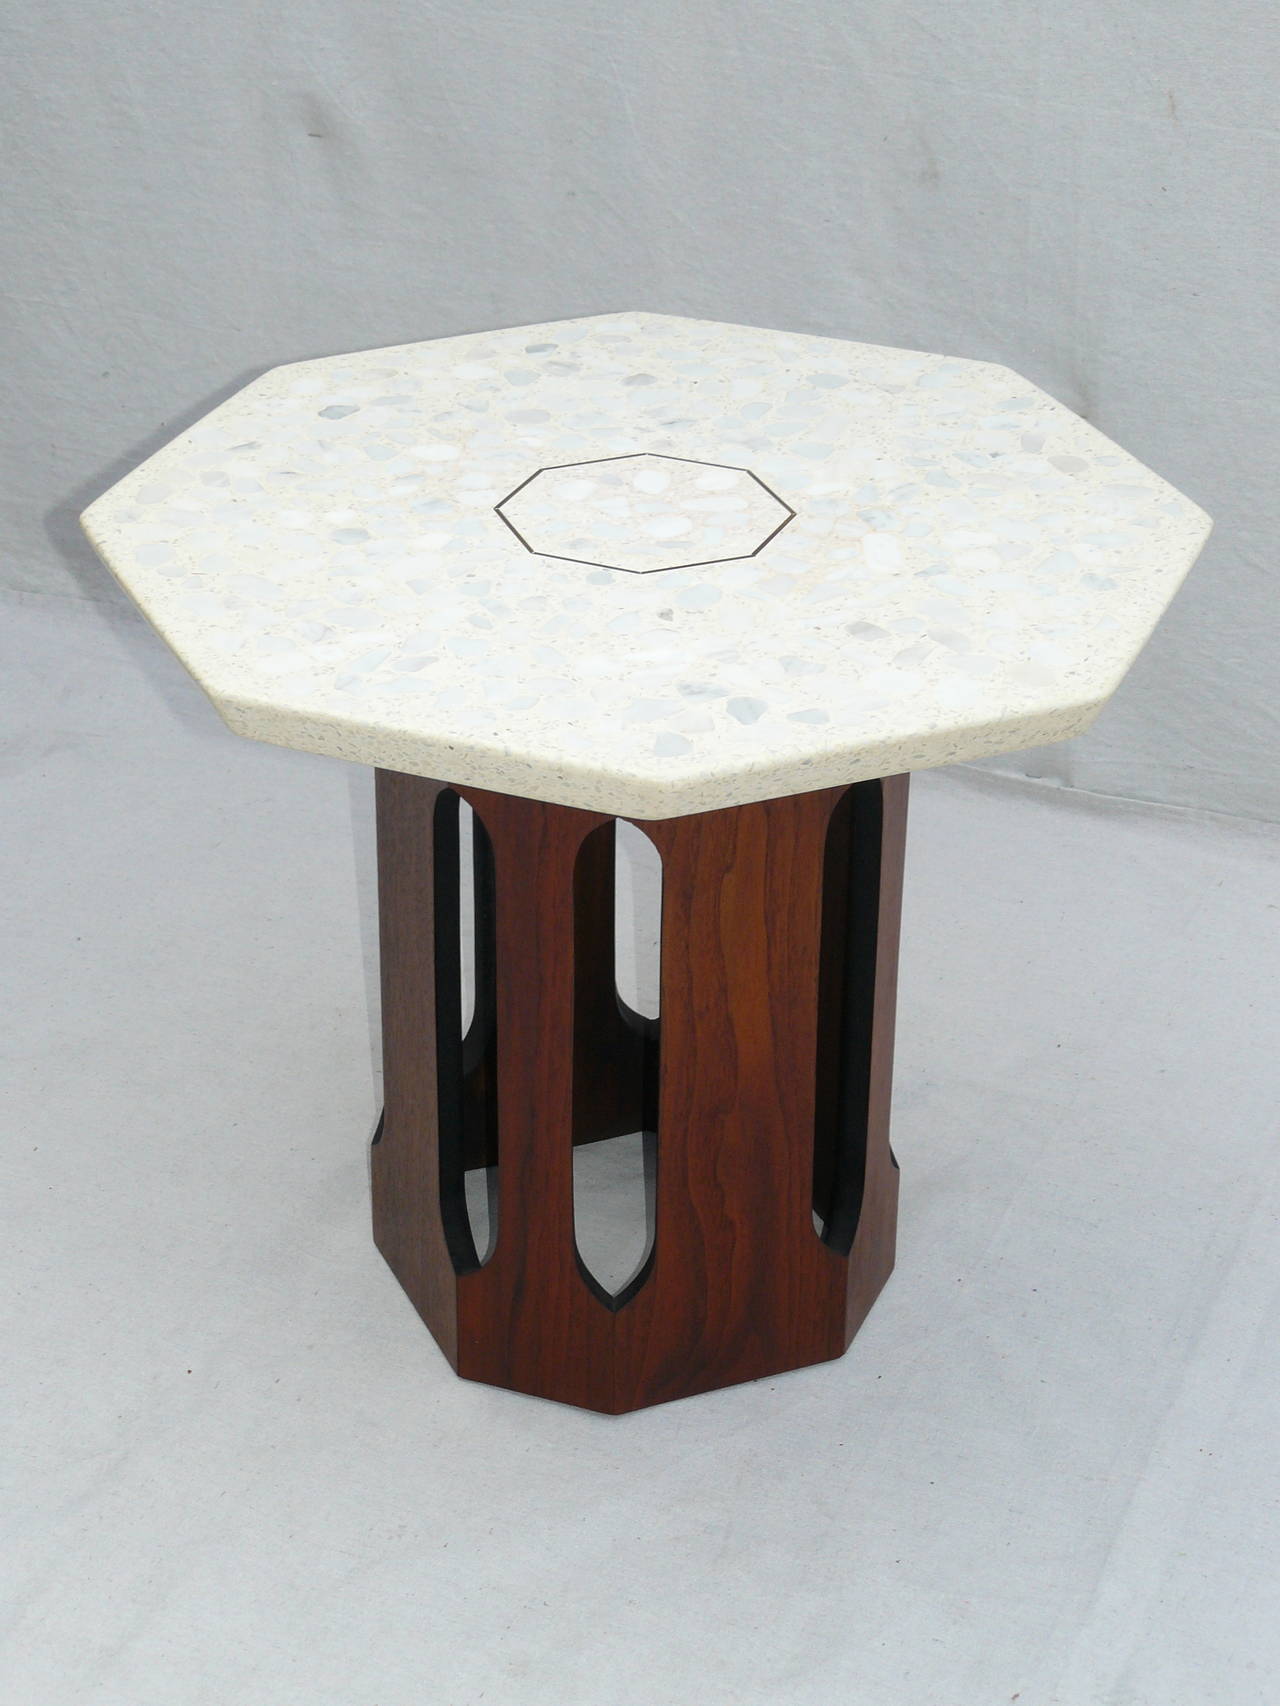 Mint condition Harvey Probber terrazzo top side table. Terrazzo top with brass inlay detail. Walnut base.